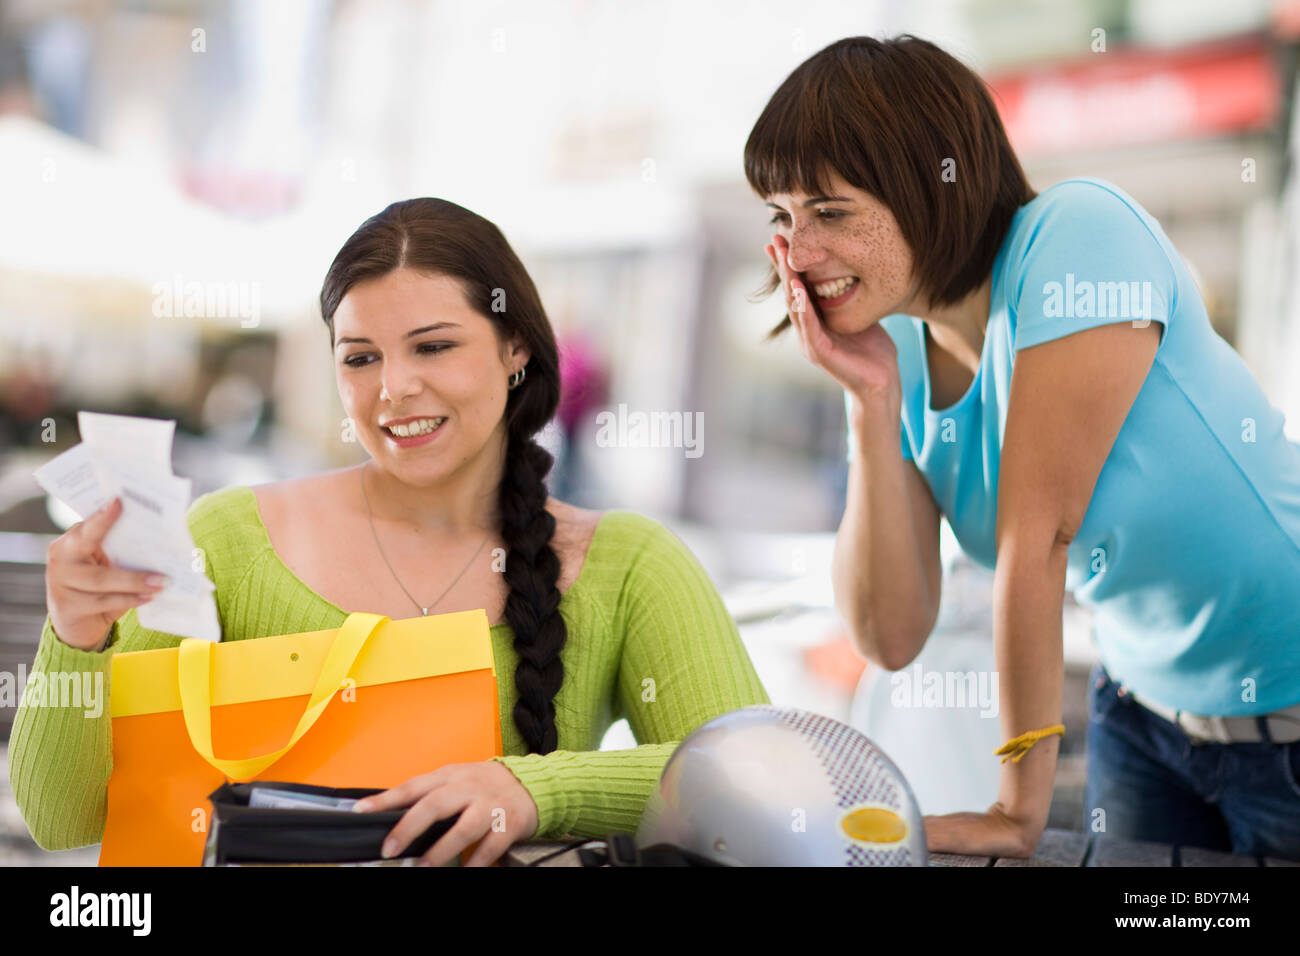 women with shoppingbag and receipt Stock Photo